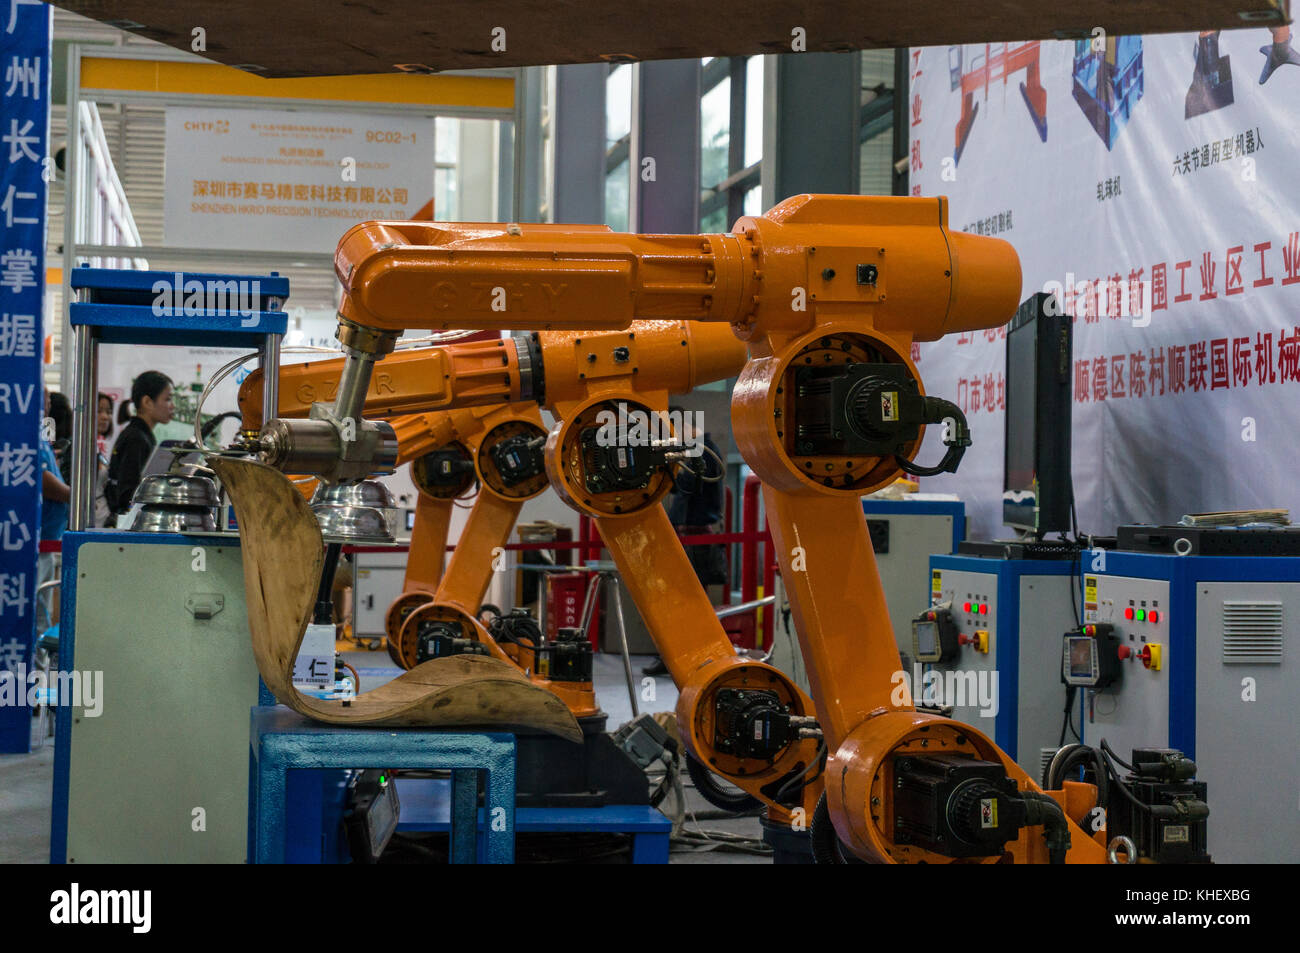 Robots assembly line at China hi-tech fair in Shenzhen, known as 'Silicon Valley of China', Shenzhen, China. Stock Photo